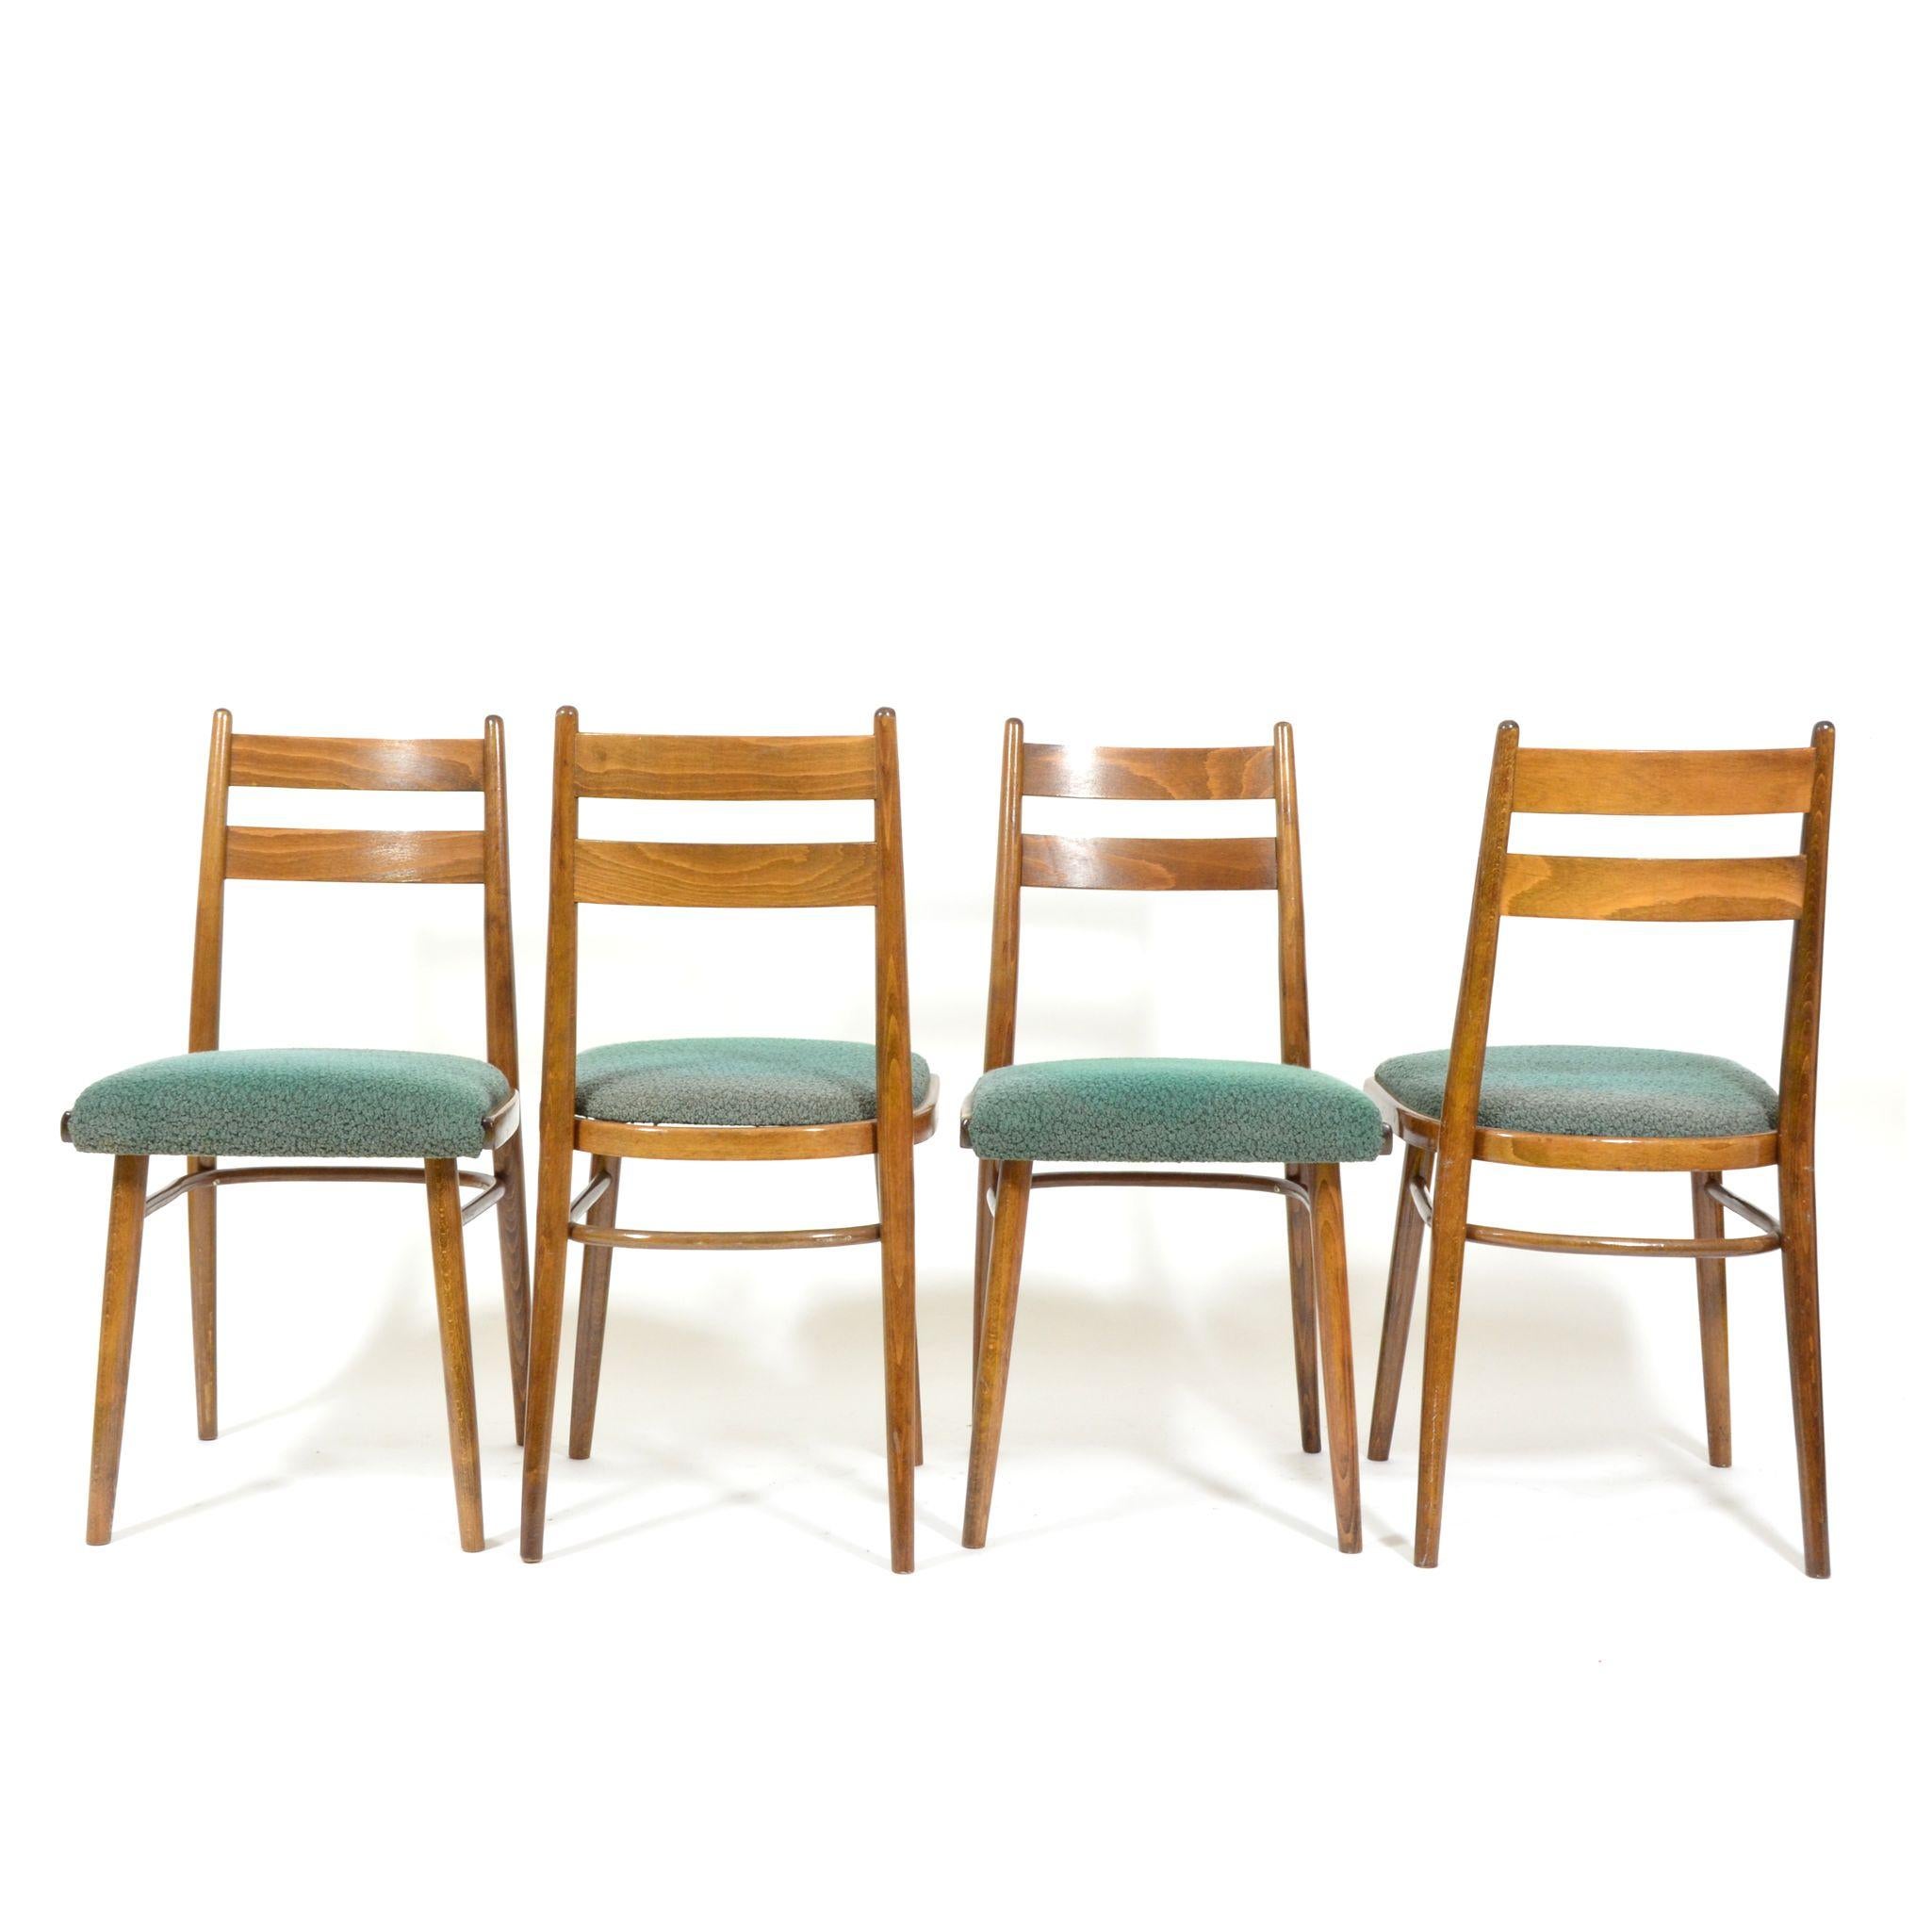 Set of Four Vintage Dining Chairs, Green Seats, Czechoslovakia, 1970s 4